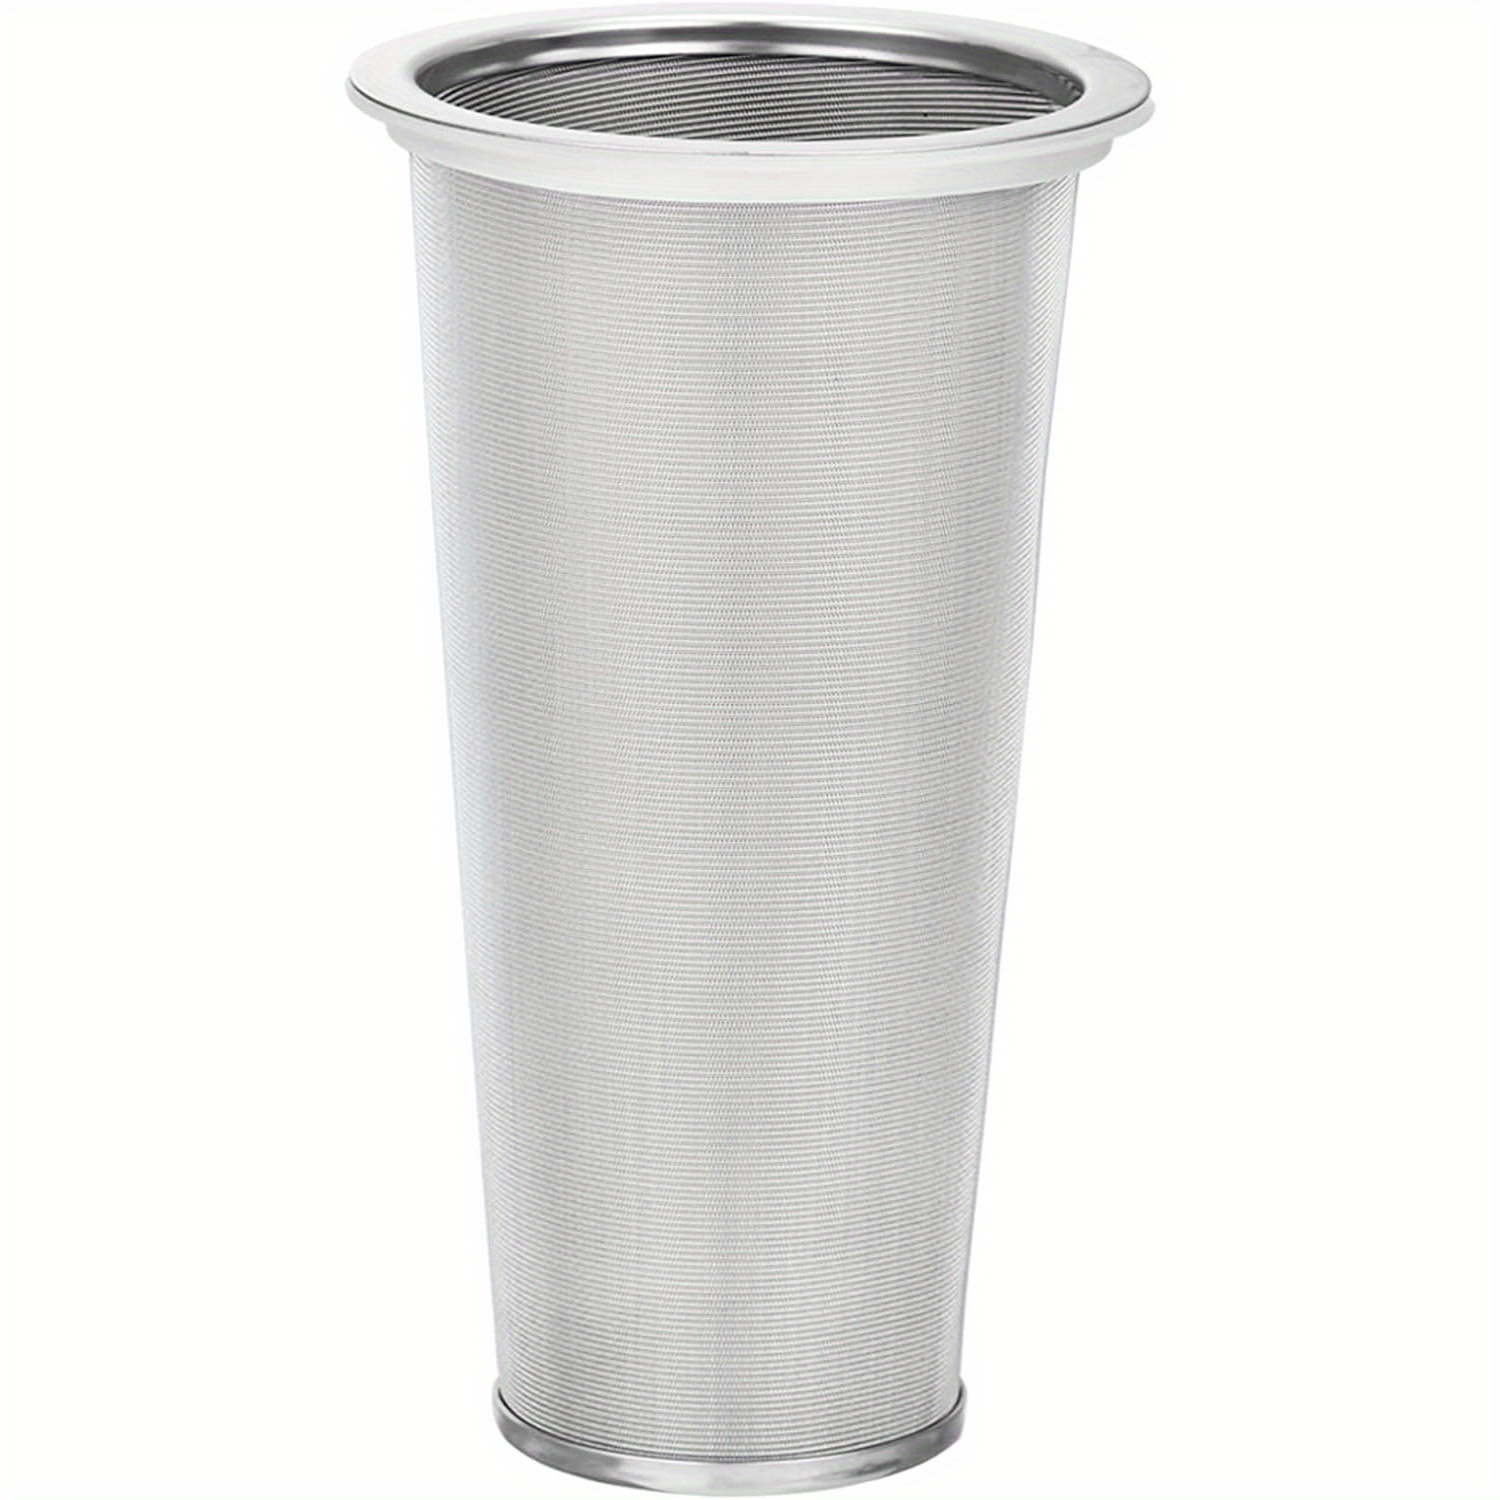 https://img.kwcdn.com/product/cold-brew-coffee-filter/d69d2f15w98k18-8f0aeaf6/open/2023-10-24/1698143472654-827193fc07324a99b630020d384692a6-goods.jpeg